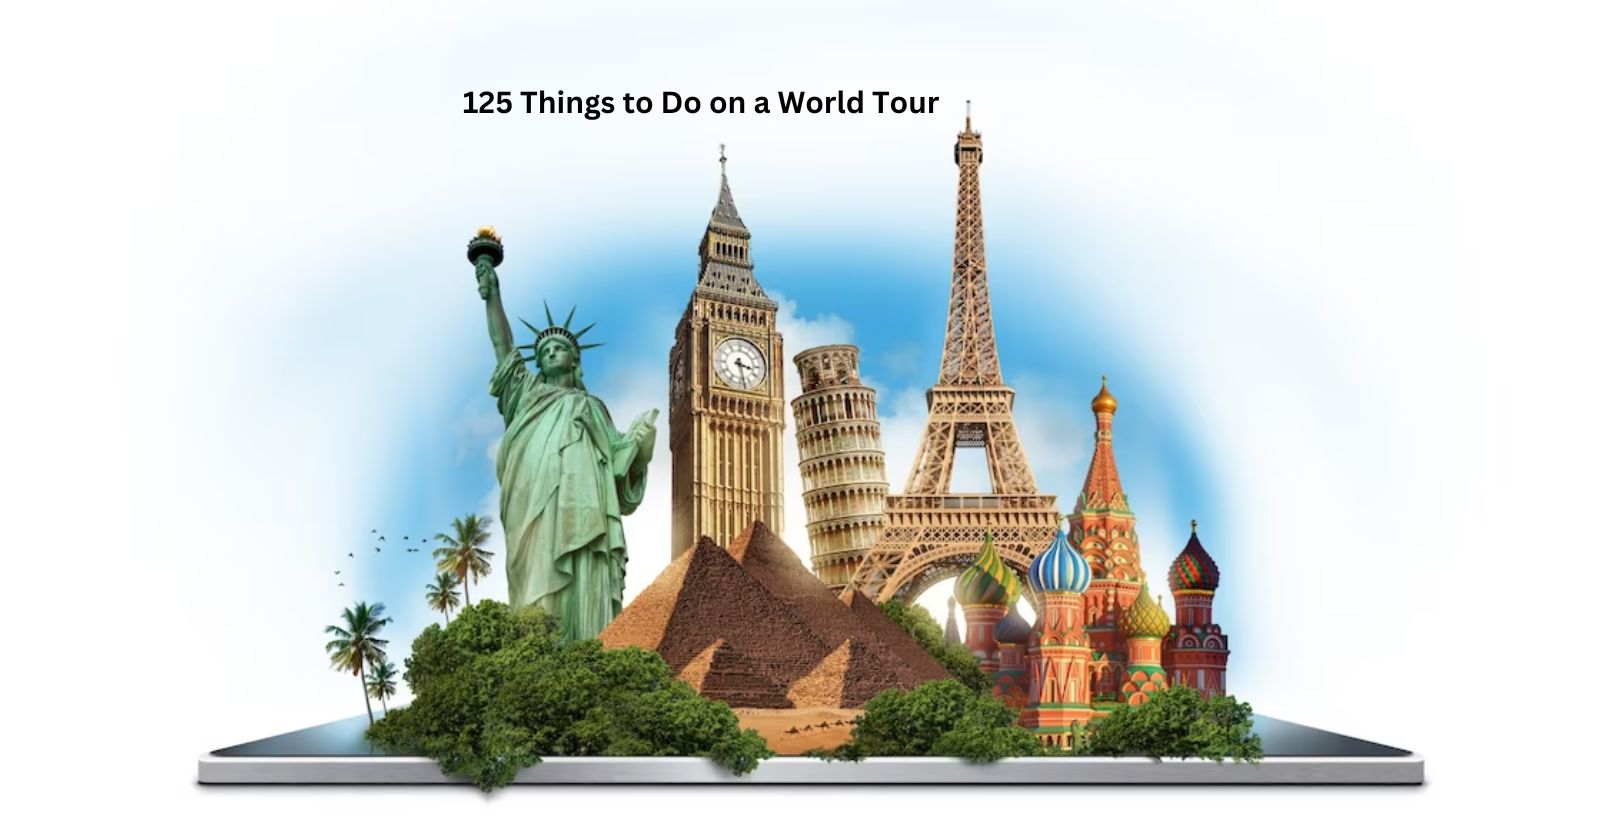 125 Things to Do on a World Tour